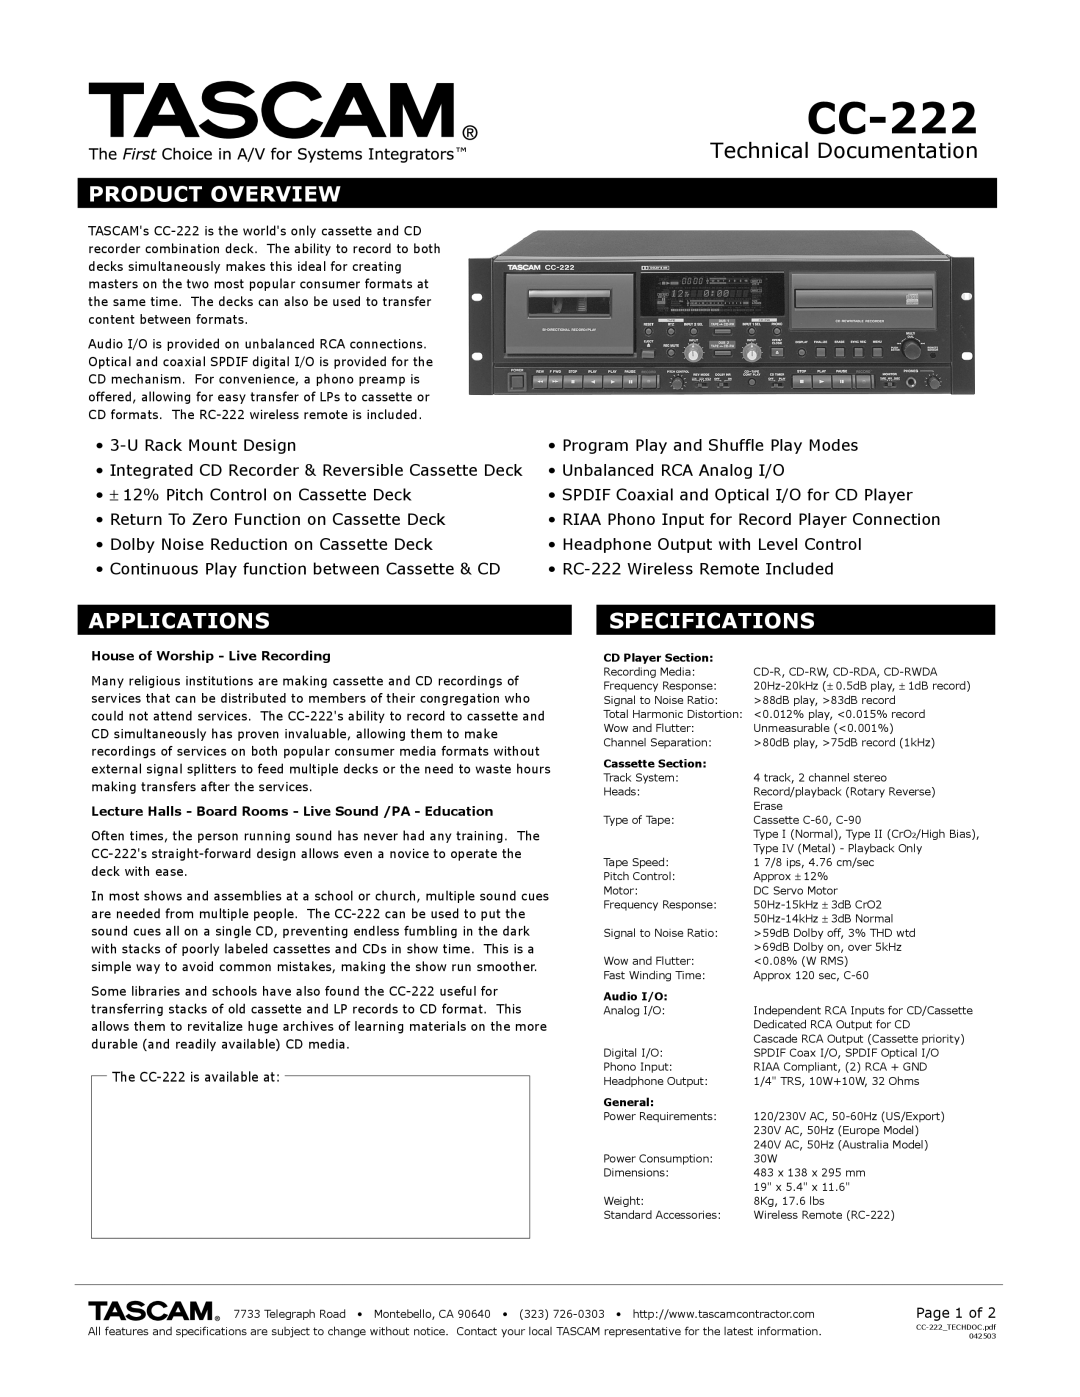 Tascam CC-222 specifications Technical Documentation, Product Overview, Applications, Specifications 